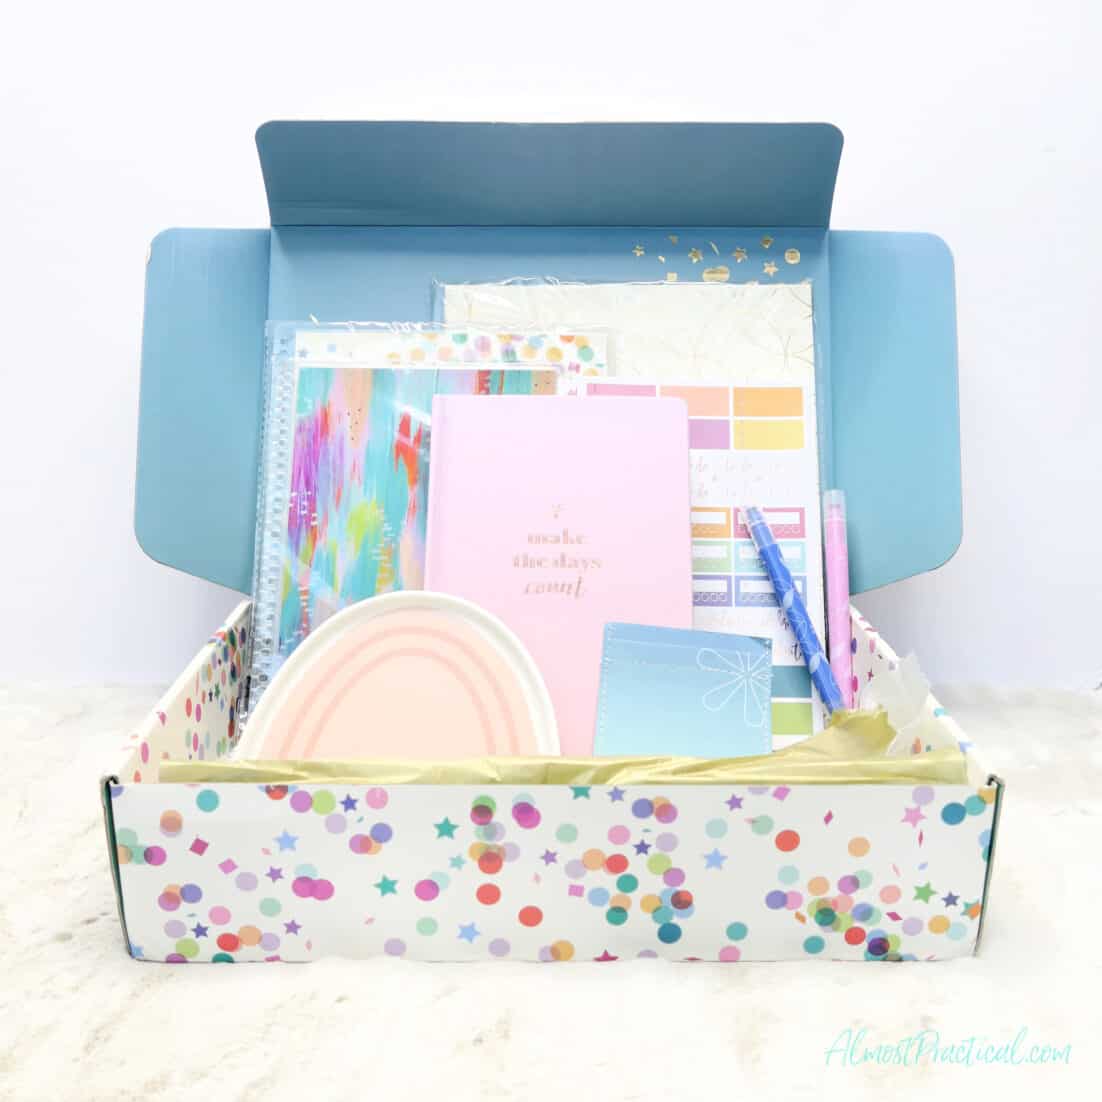 2021 Erin Condren Winter Surprise Box open with contents on display